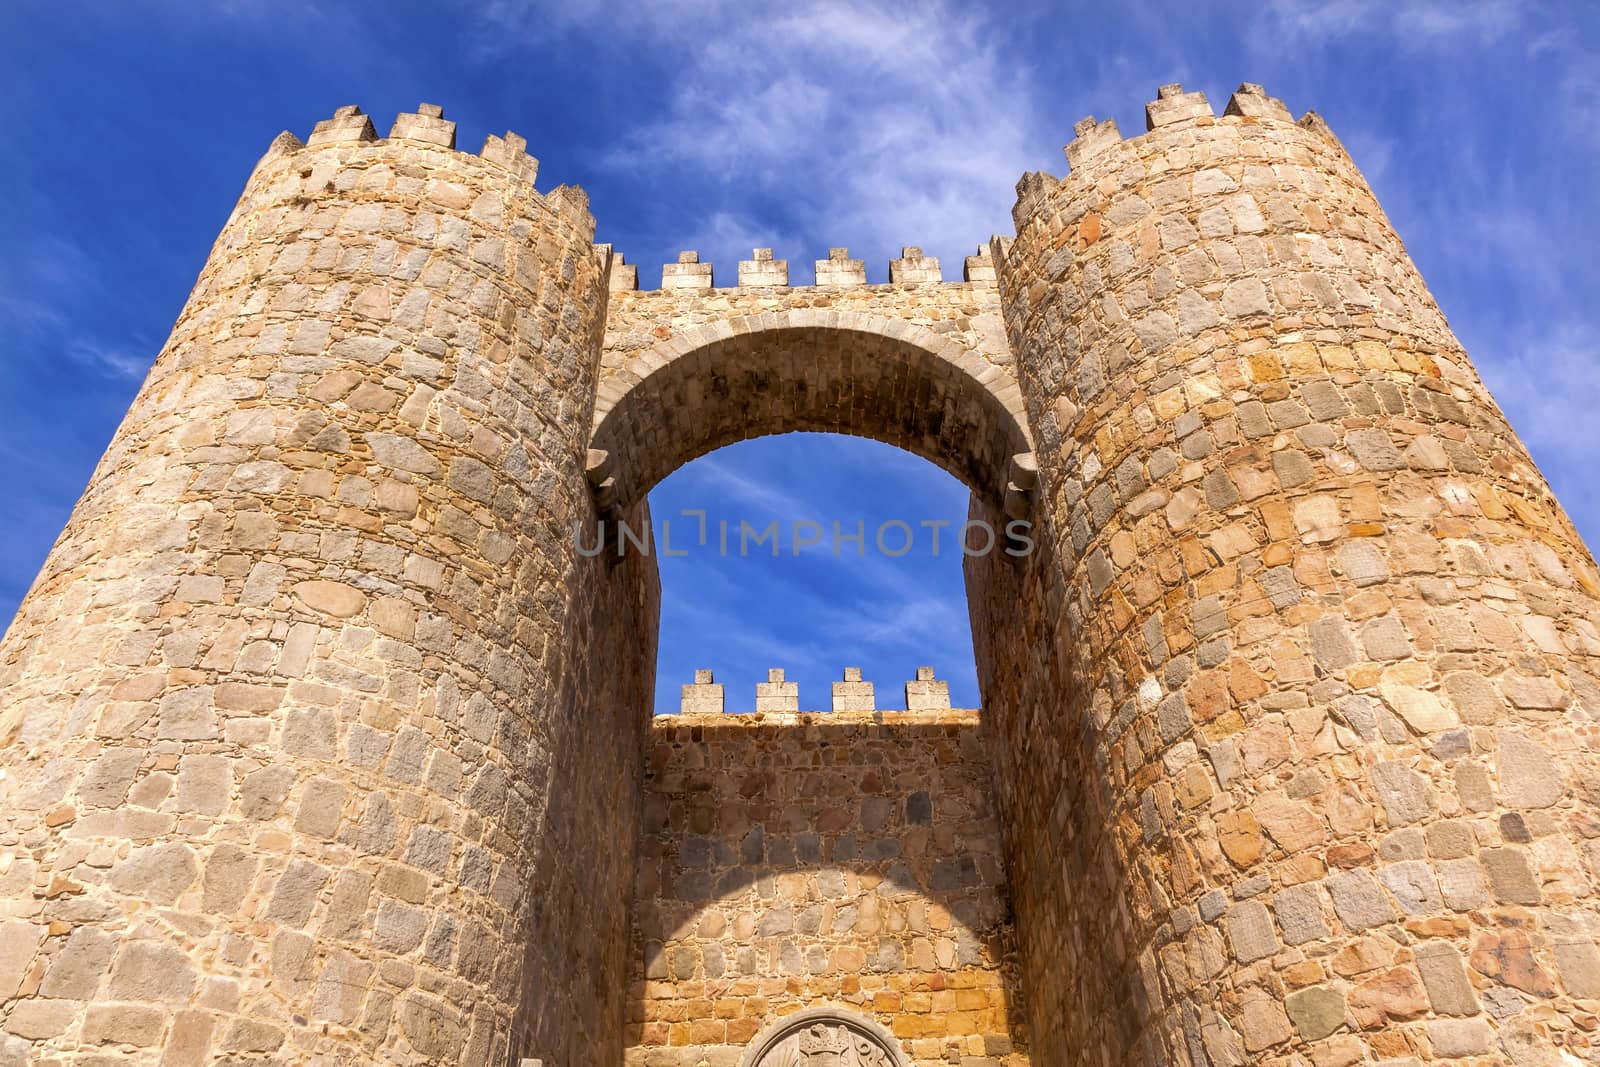 Castle Town Walls Arch Gate Avila Castile Spain.  Described as the most 16th century town in Spain. Public walls, not private.   Walls created in 1088 after Christians conquer and take the city from the Moors  